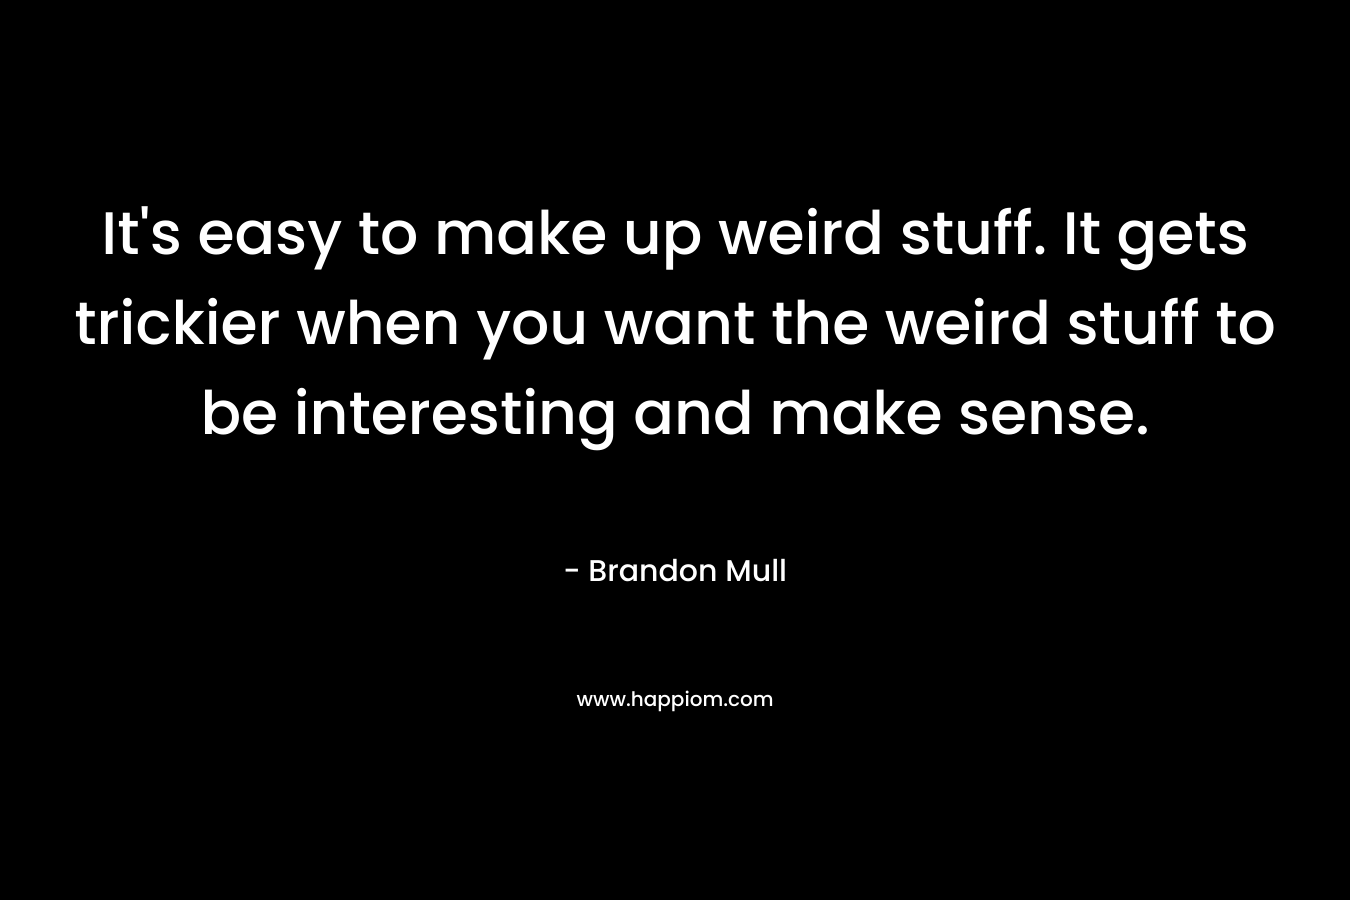 It’s easy to make up weird stuff. It gets trickier when you want the weird stuff to be interesting and make sense. – Brandon Mull